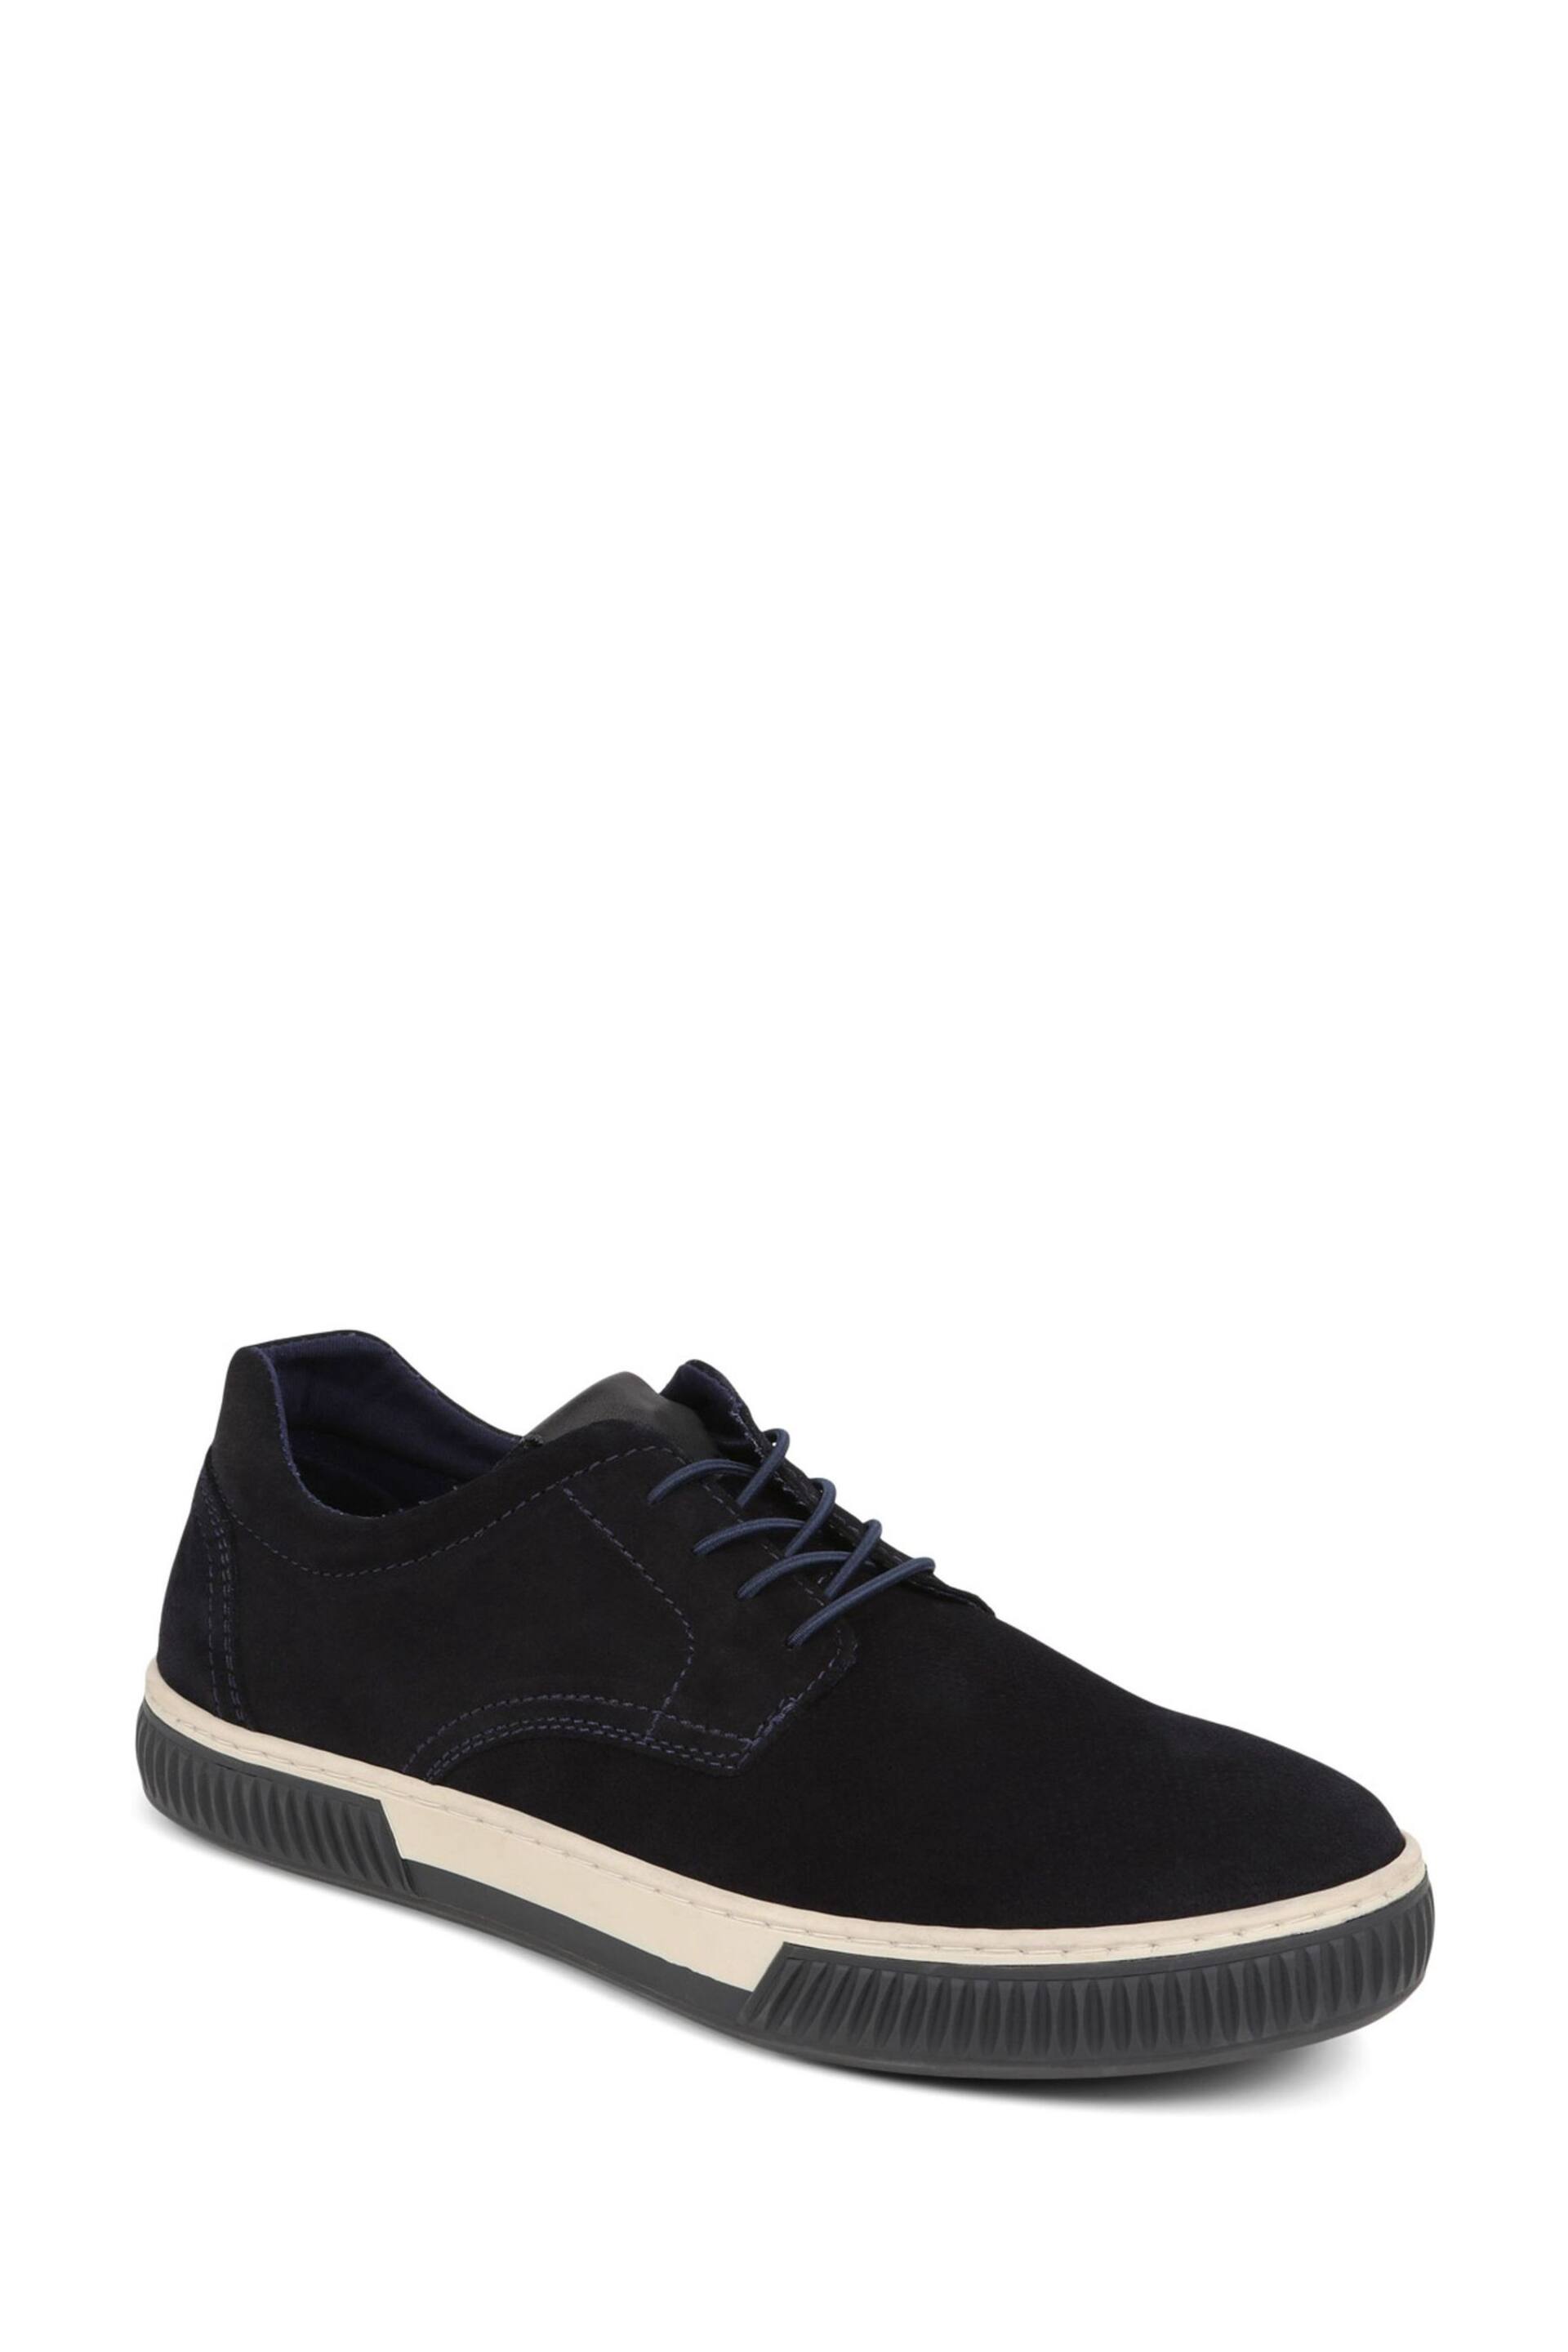 Jones Bootmaker Blue Seaford Suede Trainers - Image 4 of 6